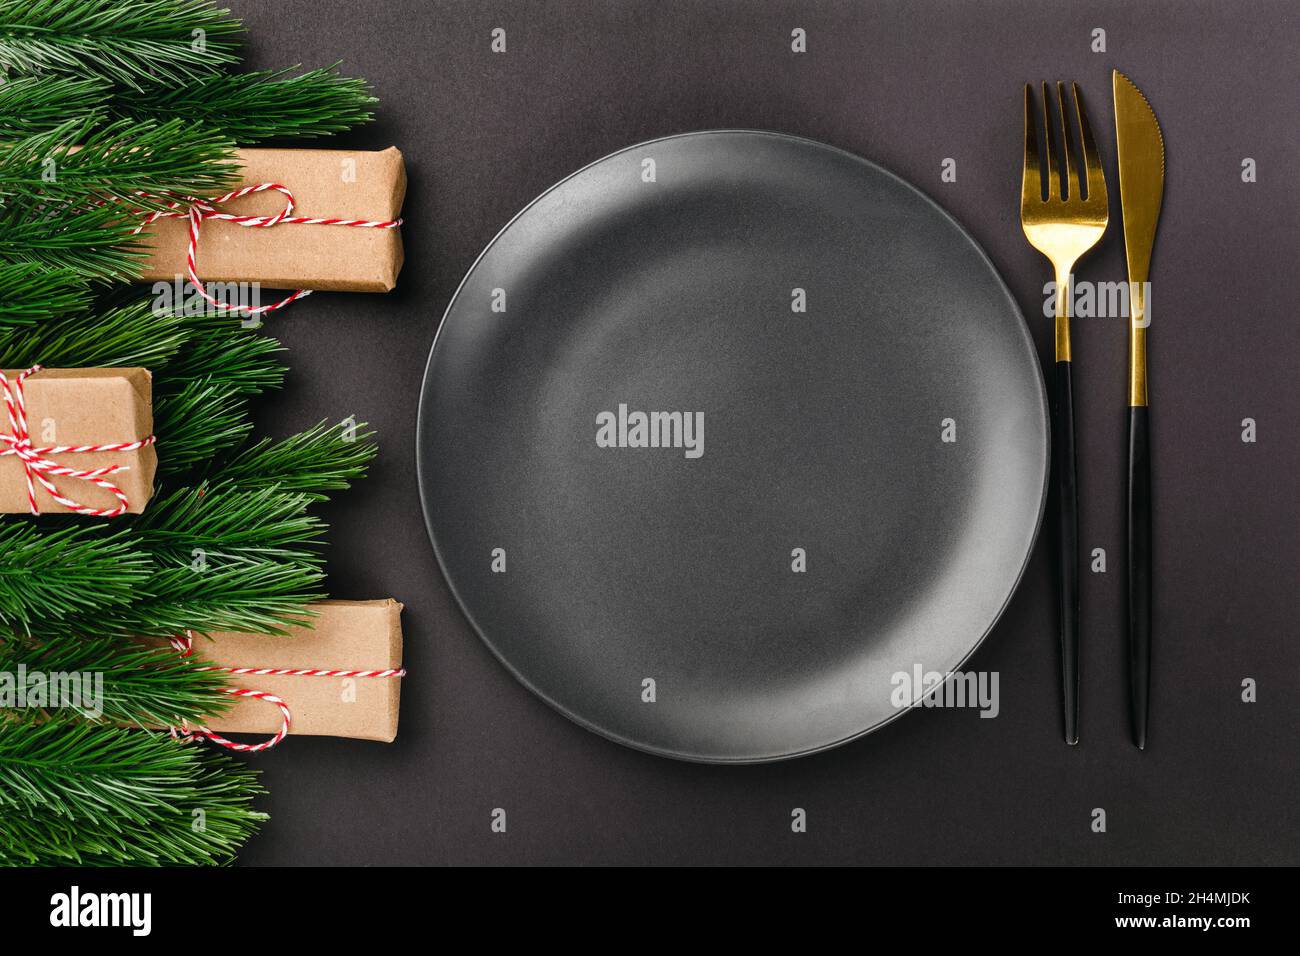 top view of black cutlery knife and fork near black empty plate on black table with Christmas tree branches and decorations from gift boxes Stock Photo